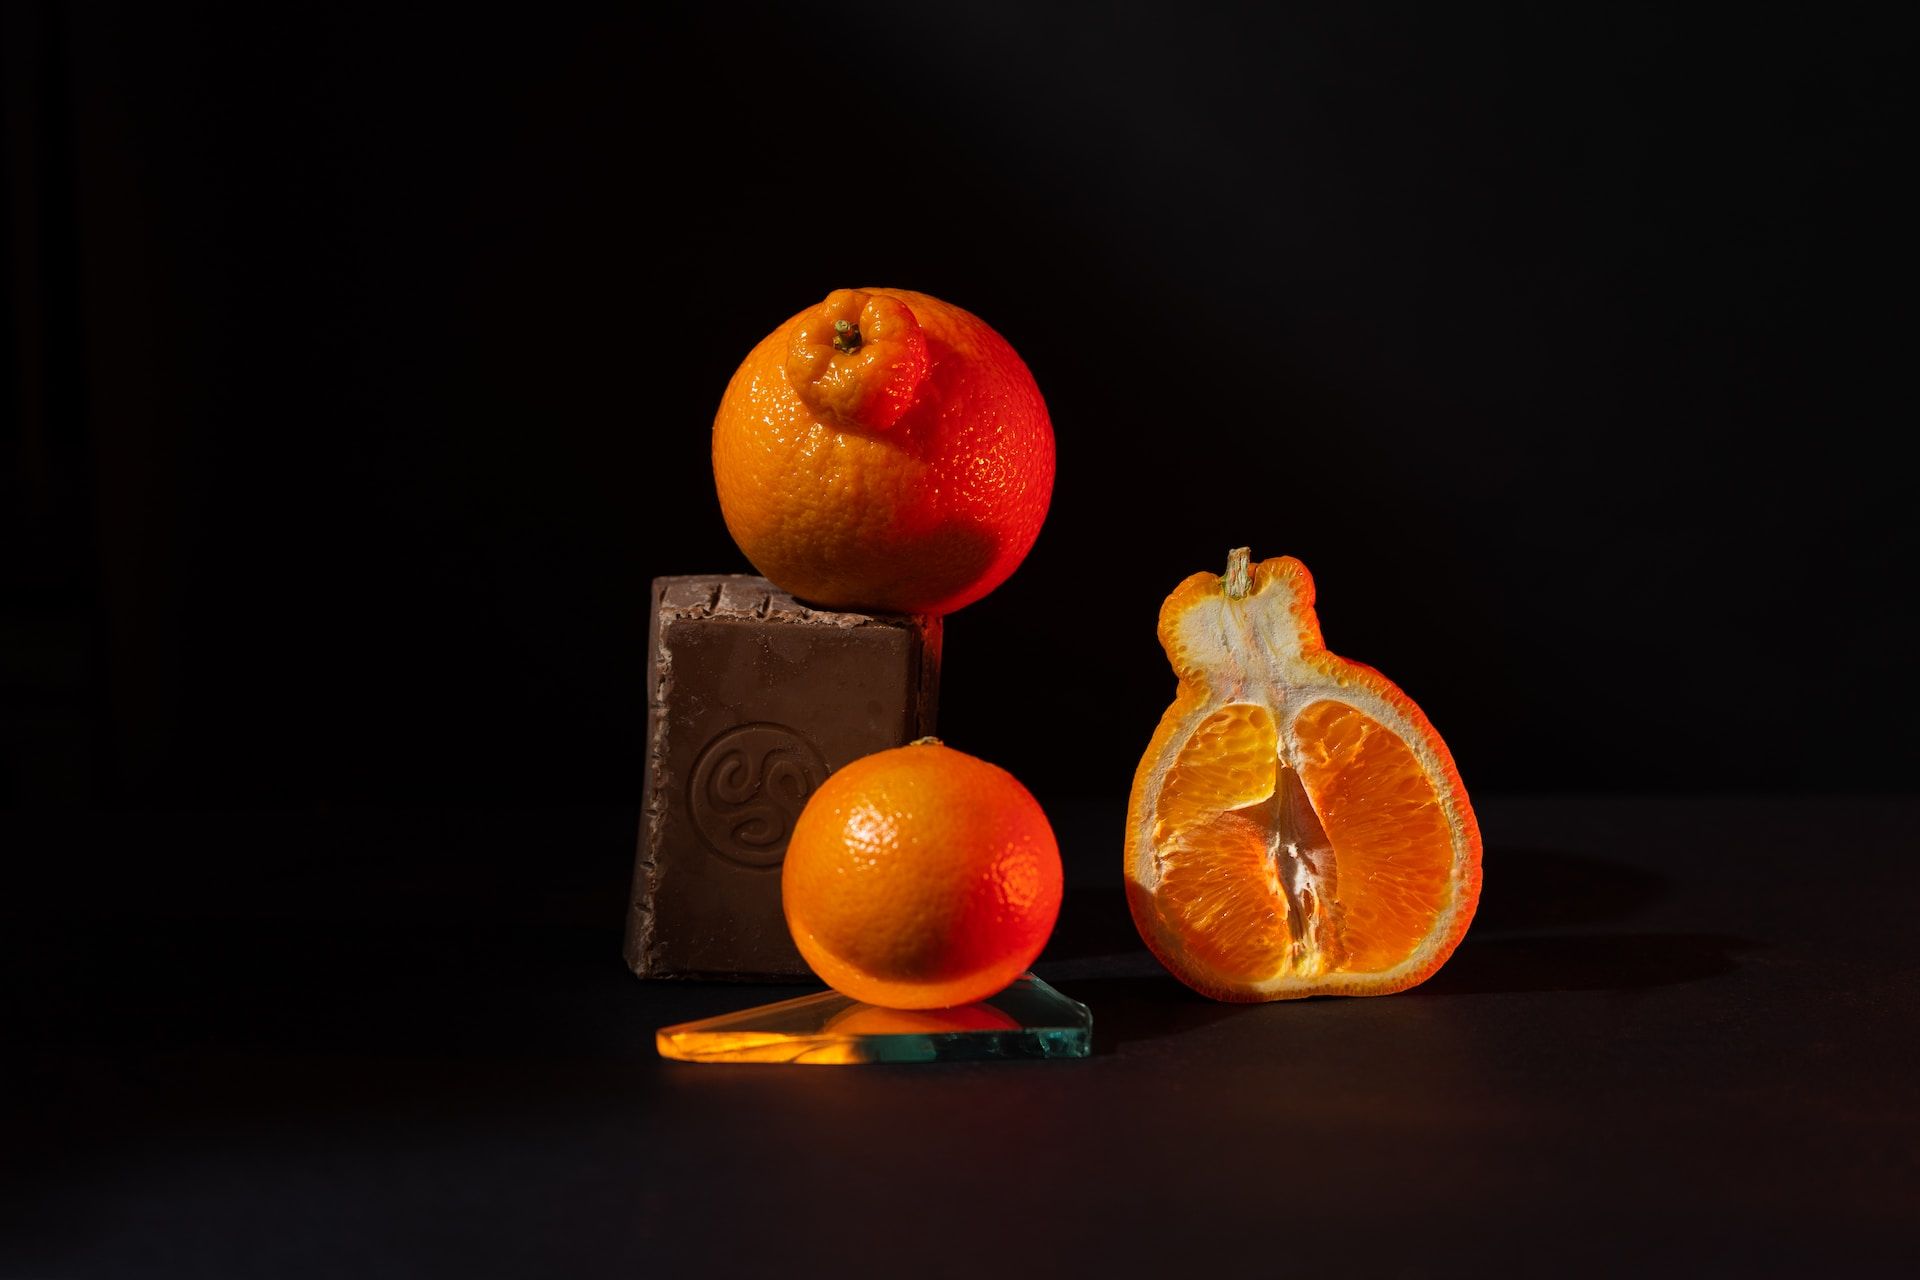 Oranges with a piece of chocolate